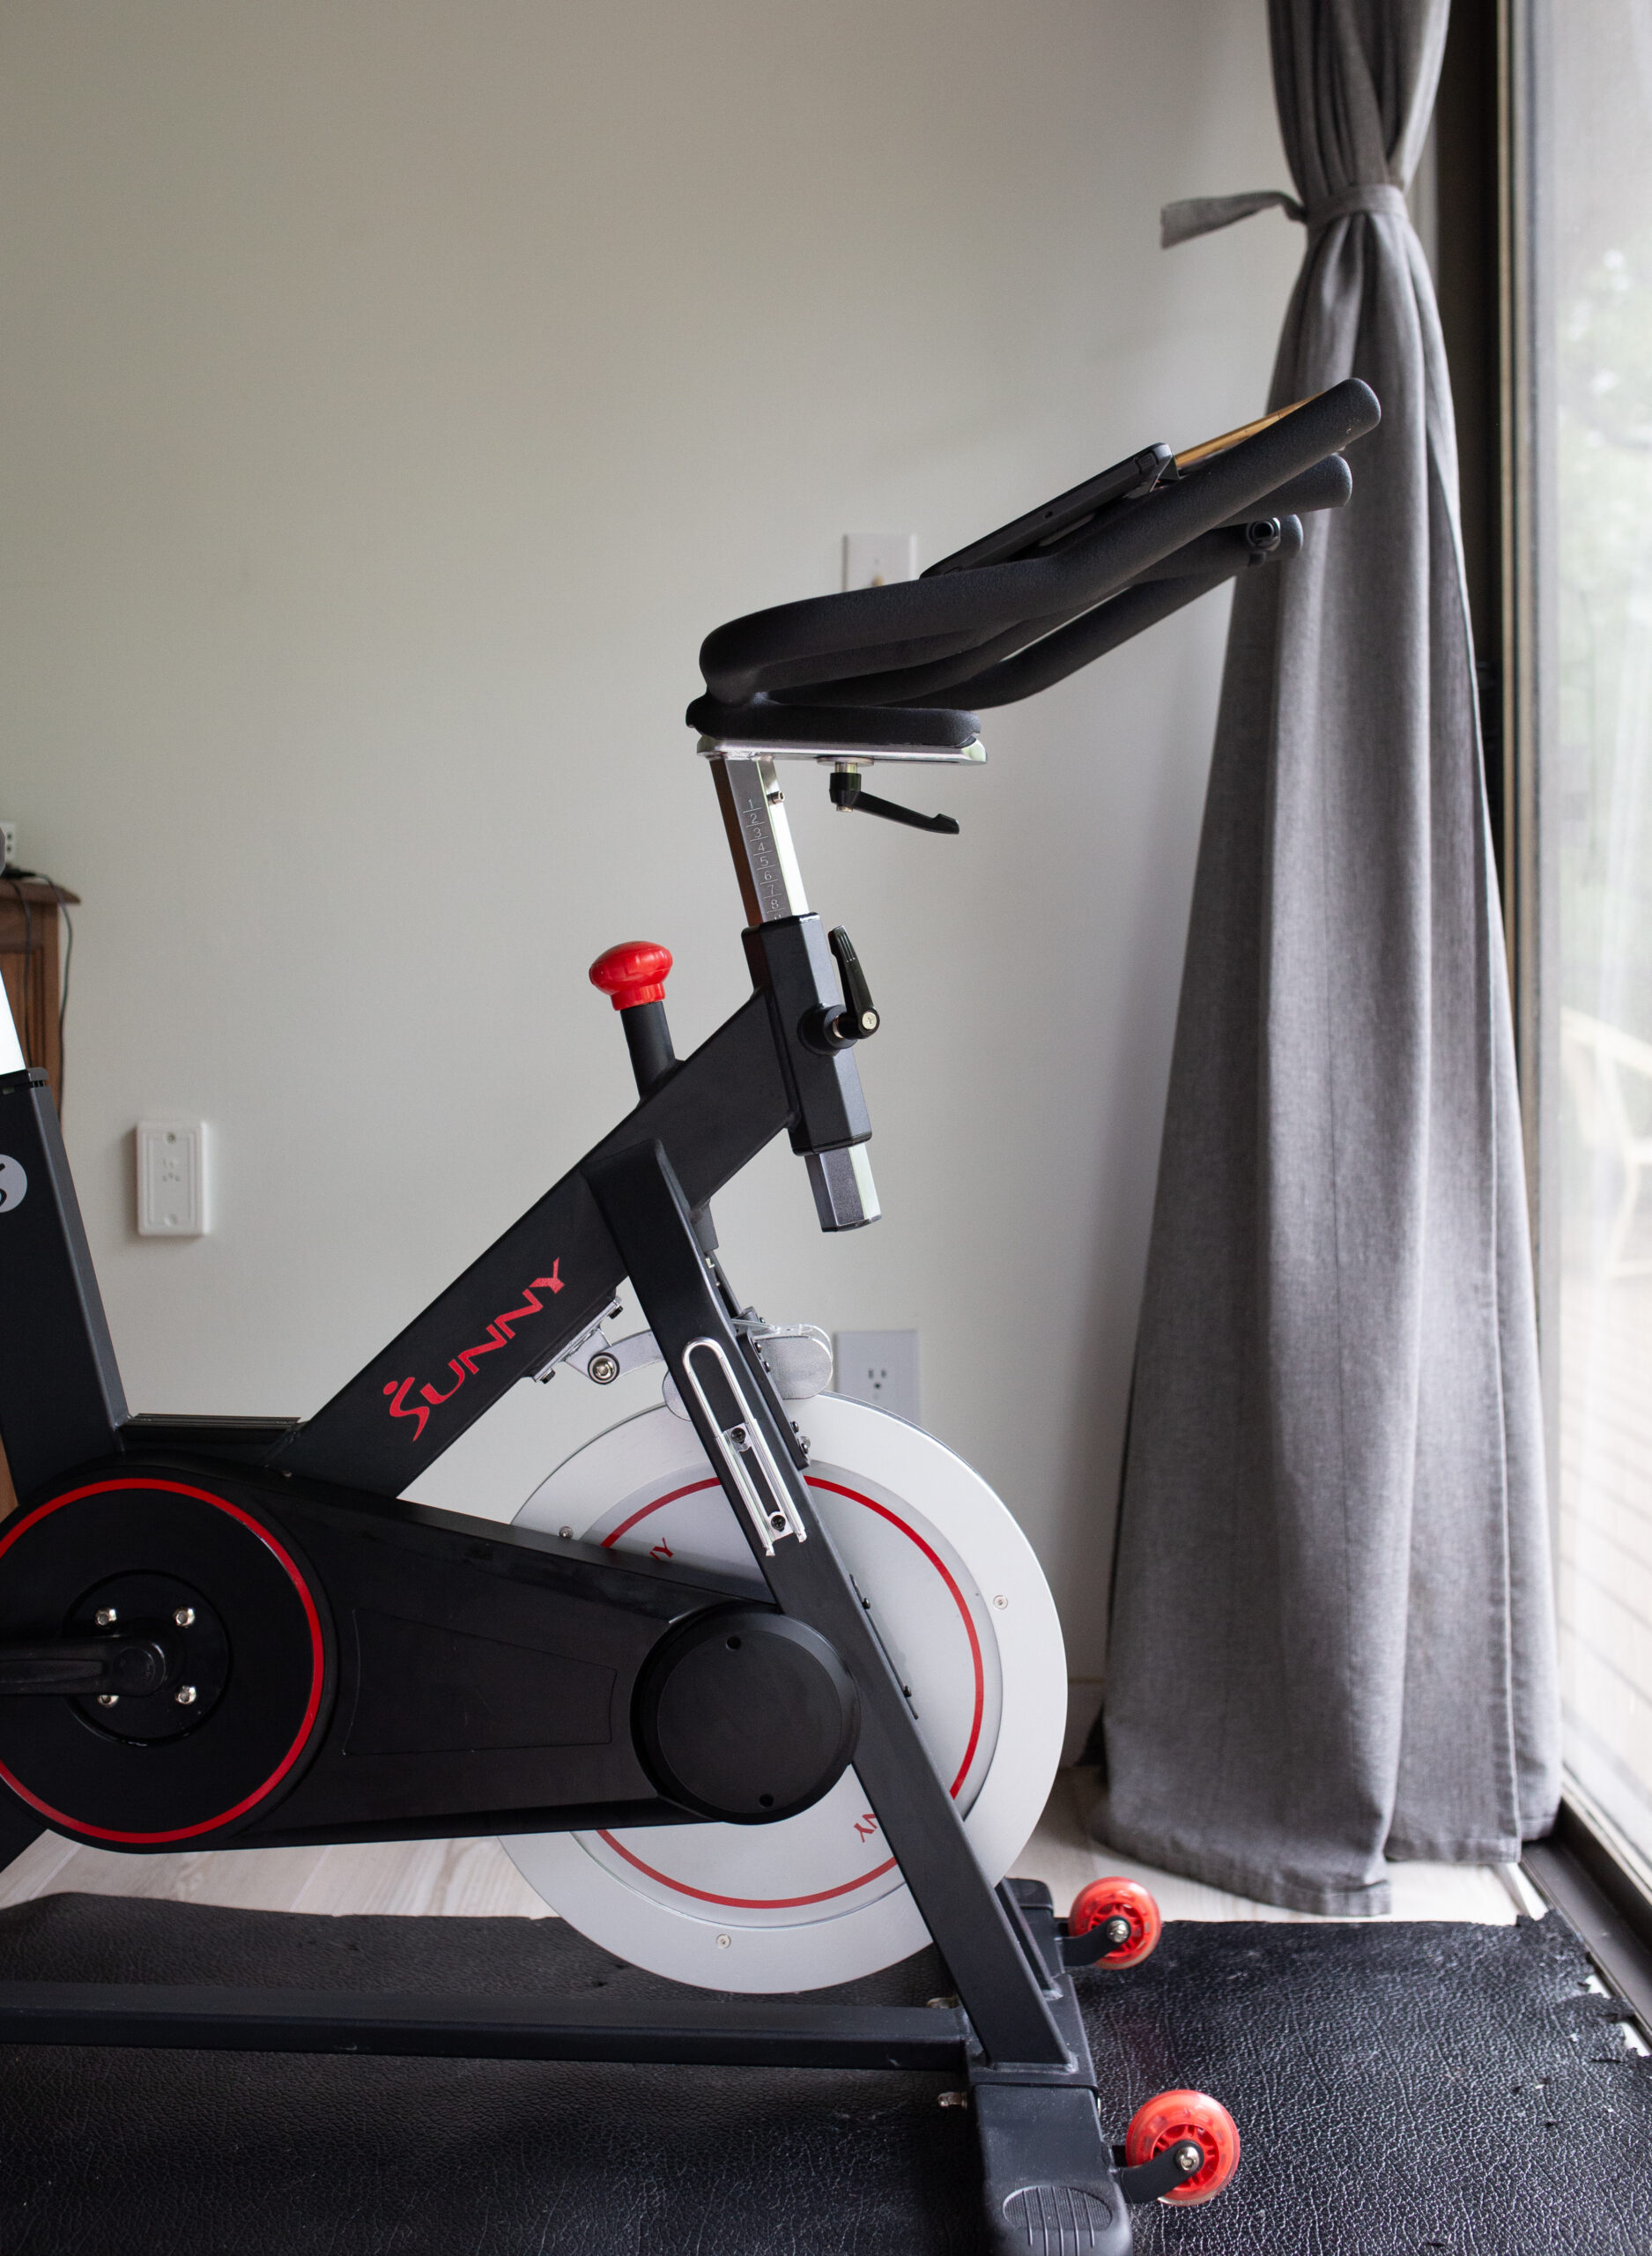 How to get the Peloton Experience with a non-Peloton bike. Here's how we saved $3000 using a cheaper bike and cadence sensor.